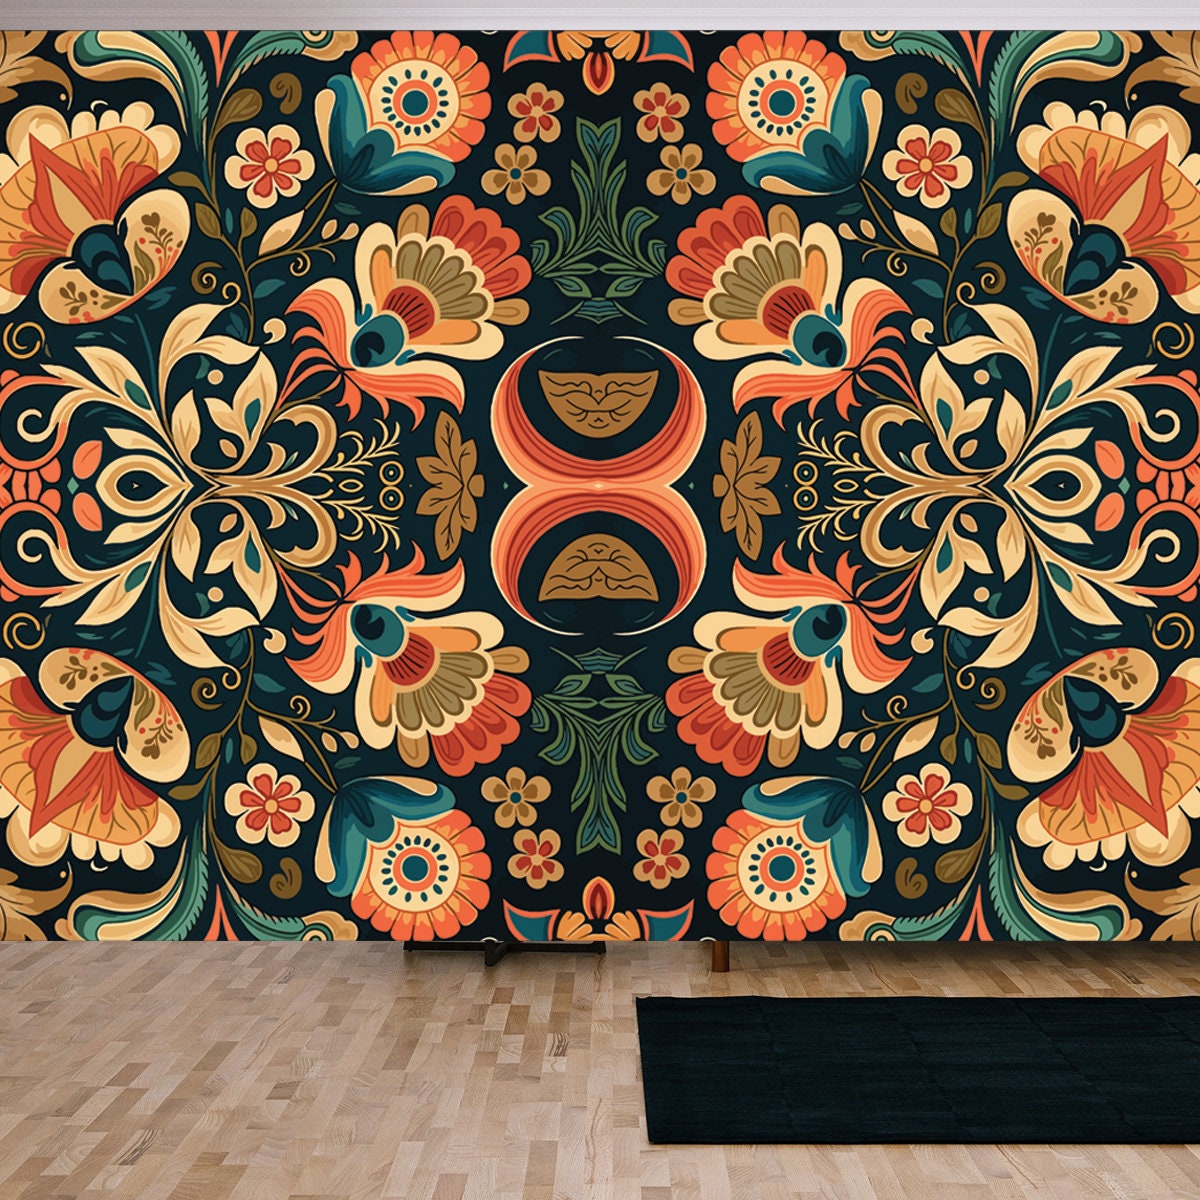 Ethnic Floral Pattern. Abstract Traditional Folk Old Ancient Antique Tribal Ethnic Flower Wallpaper Living Room Mural